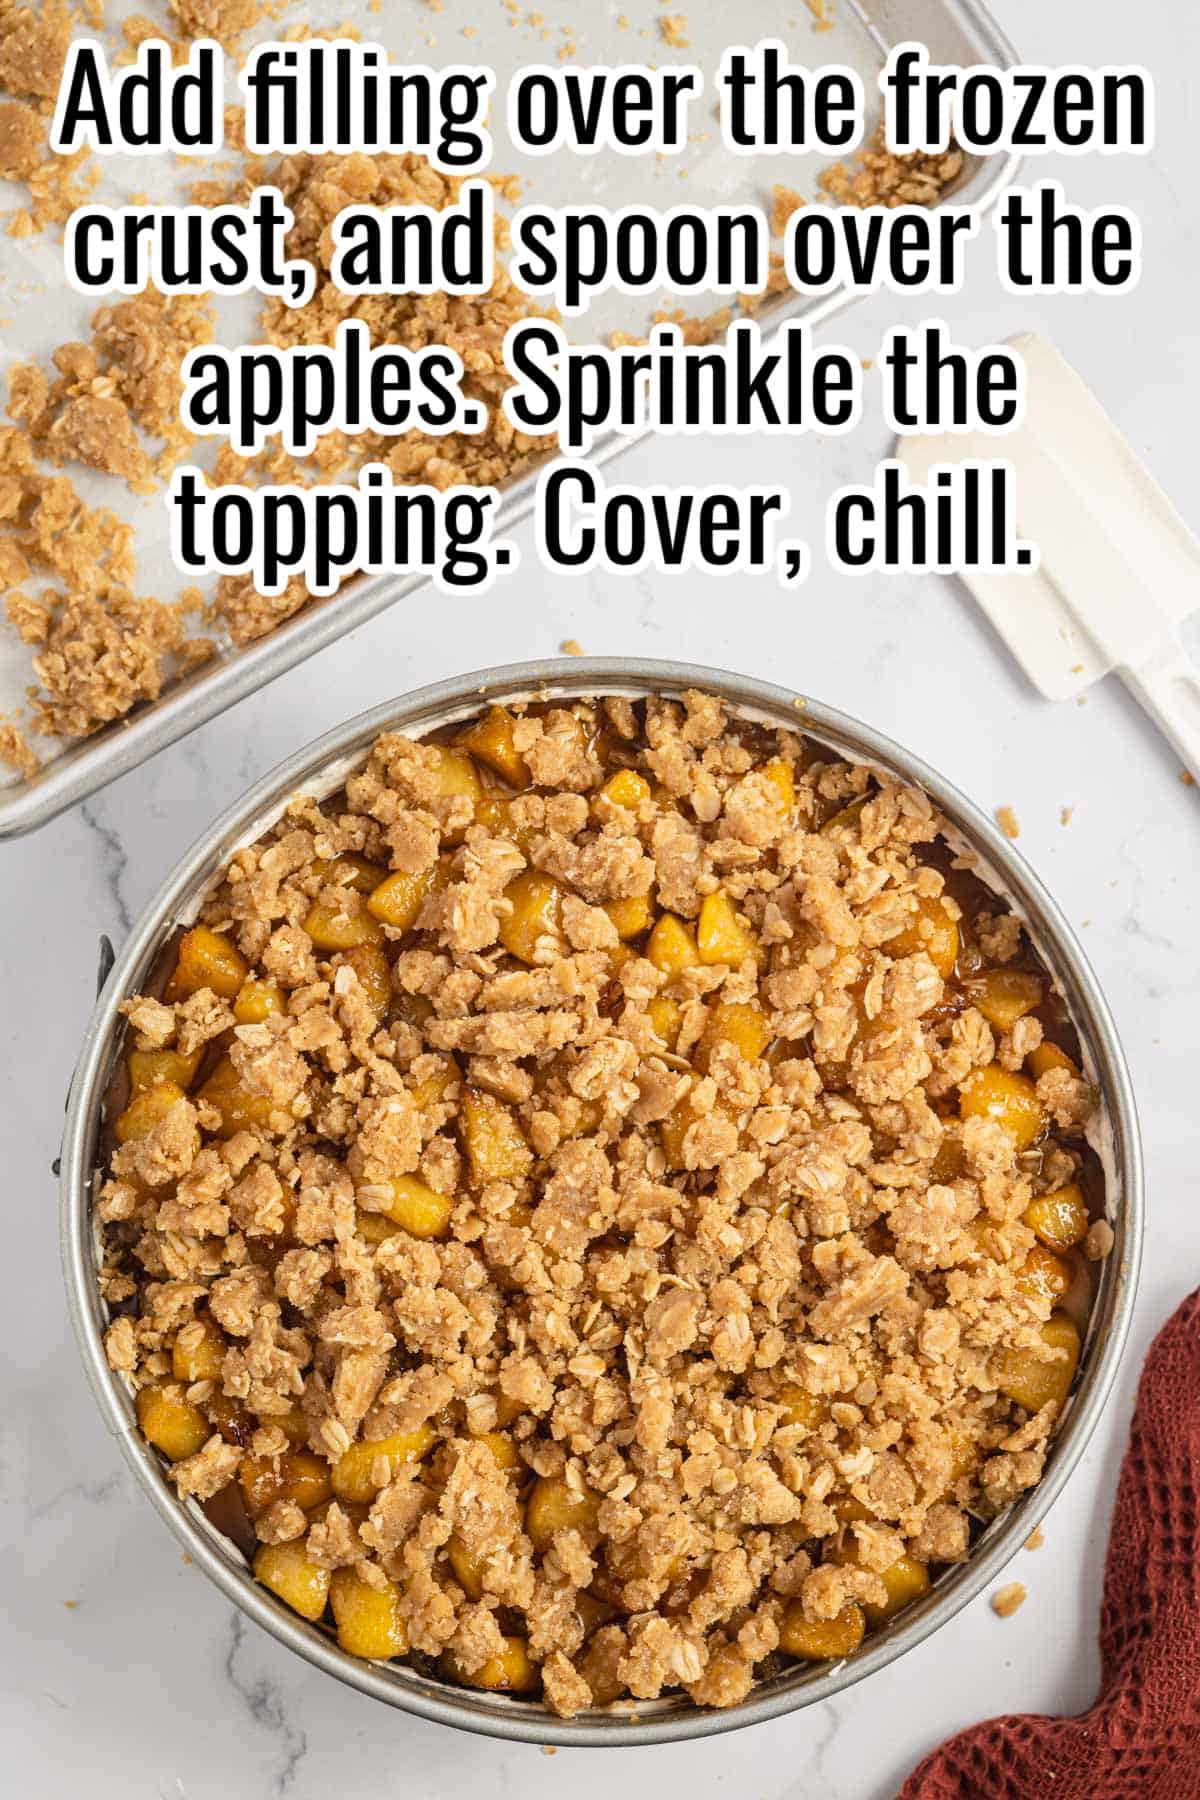 apple crisp cheesecake with instructions for topping overlaid in text.